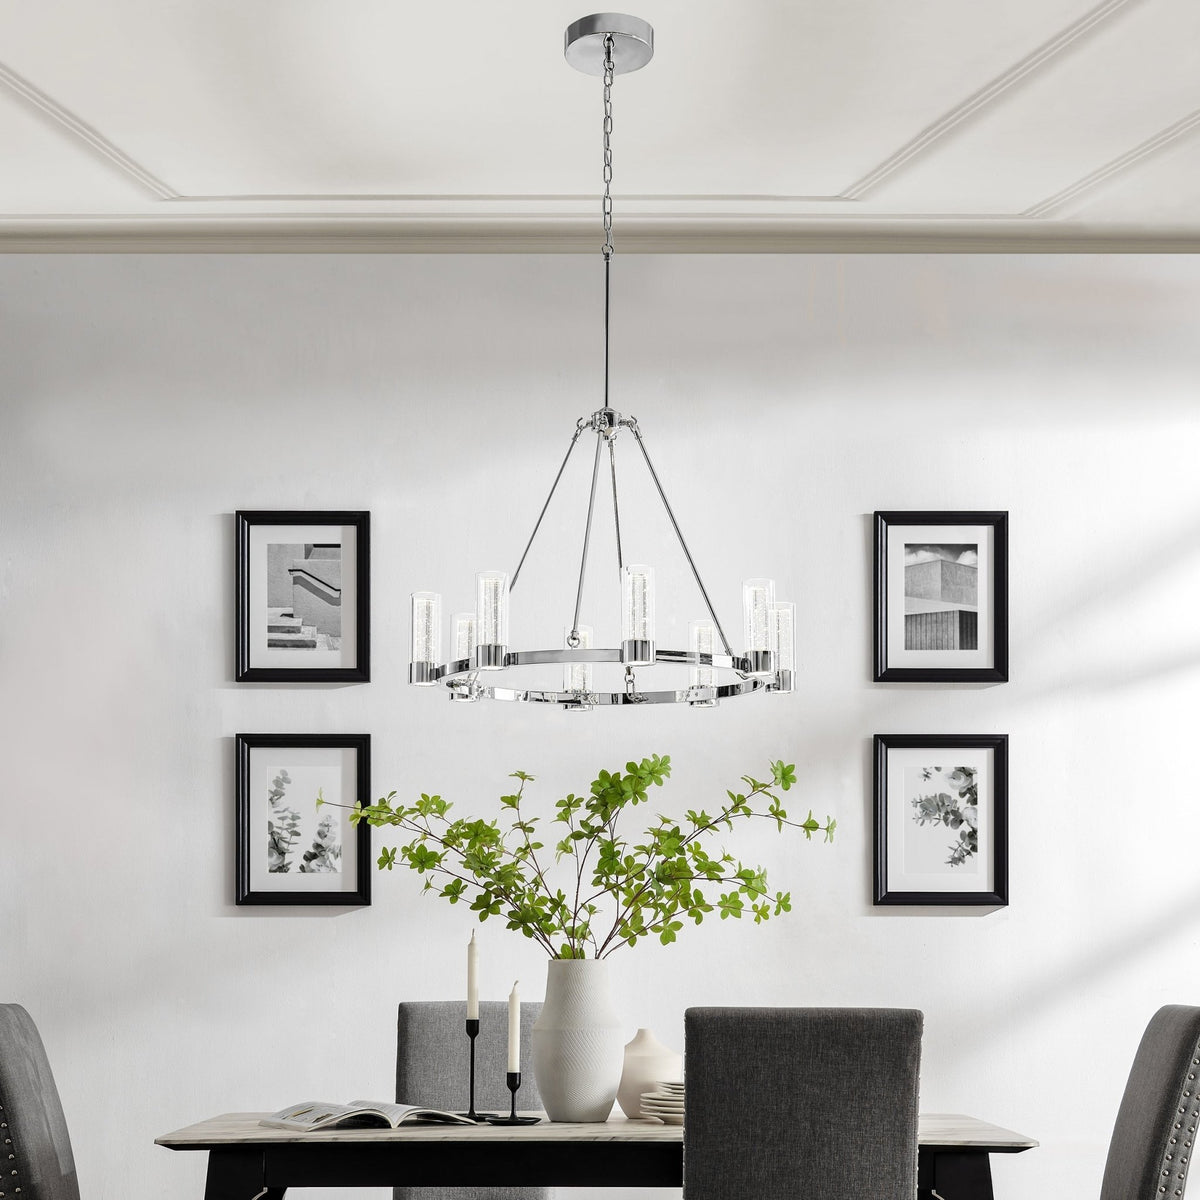 Victory 8 Light Chrome Chandelier for Dining Room